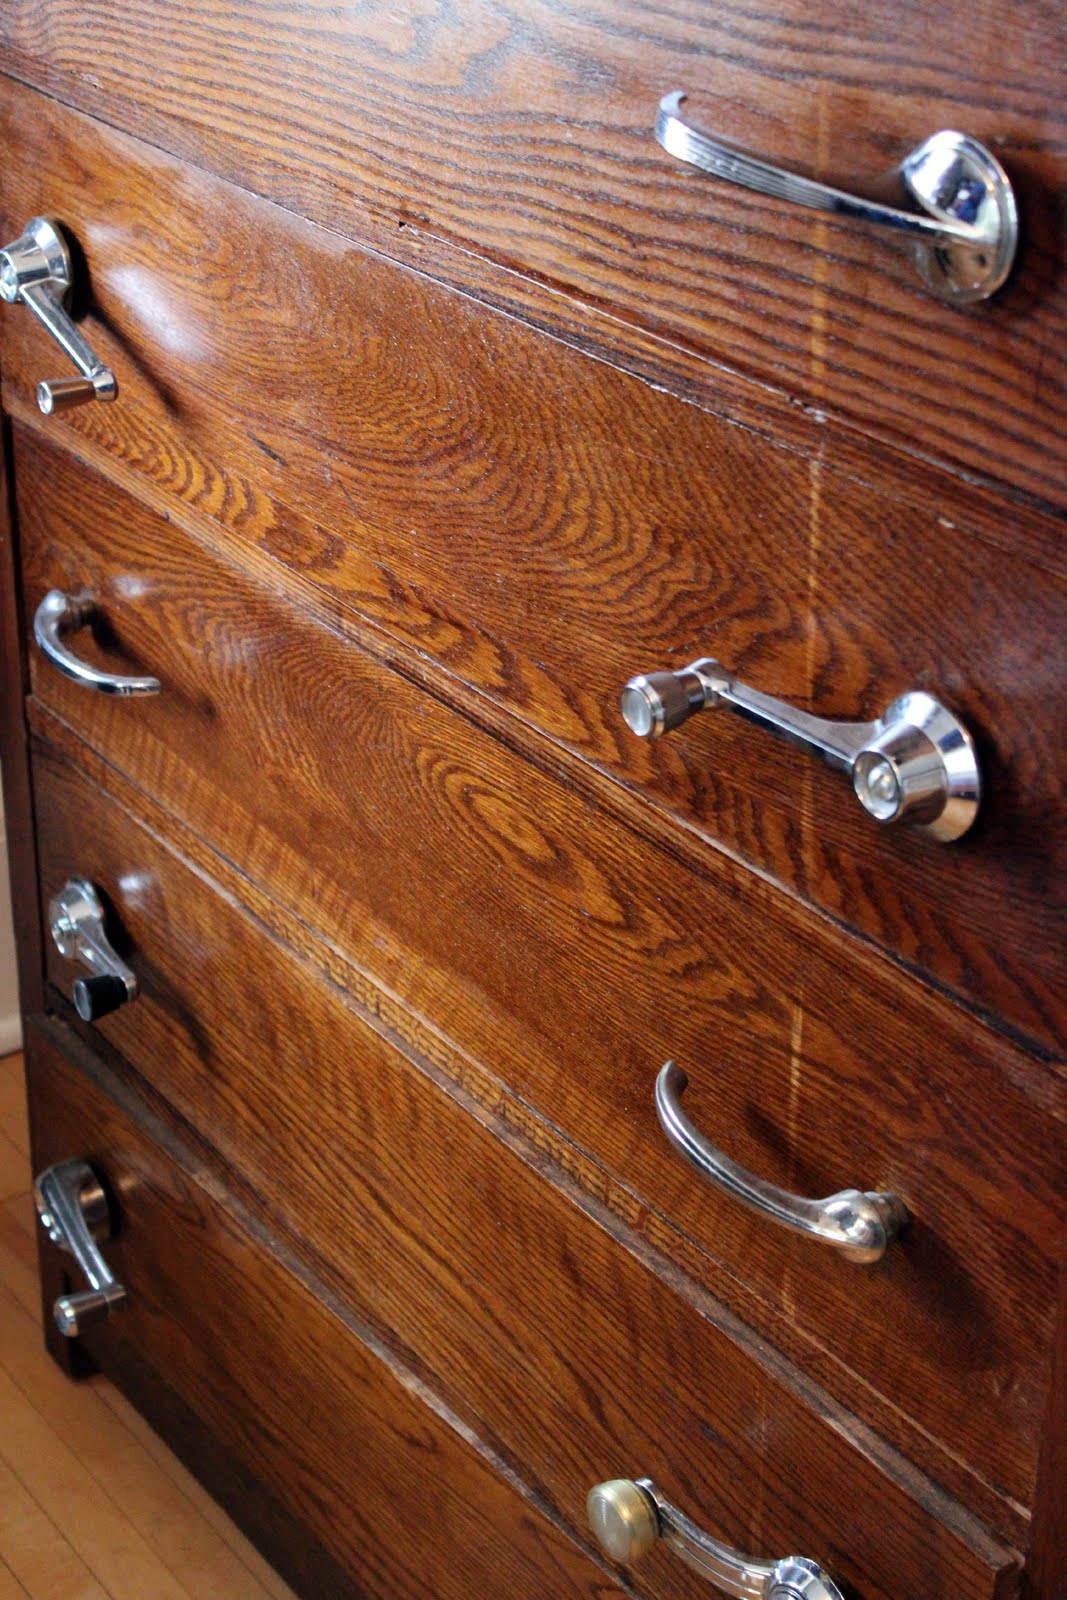 Dresser Pulls Made Out of Old Car Handles